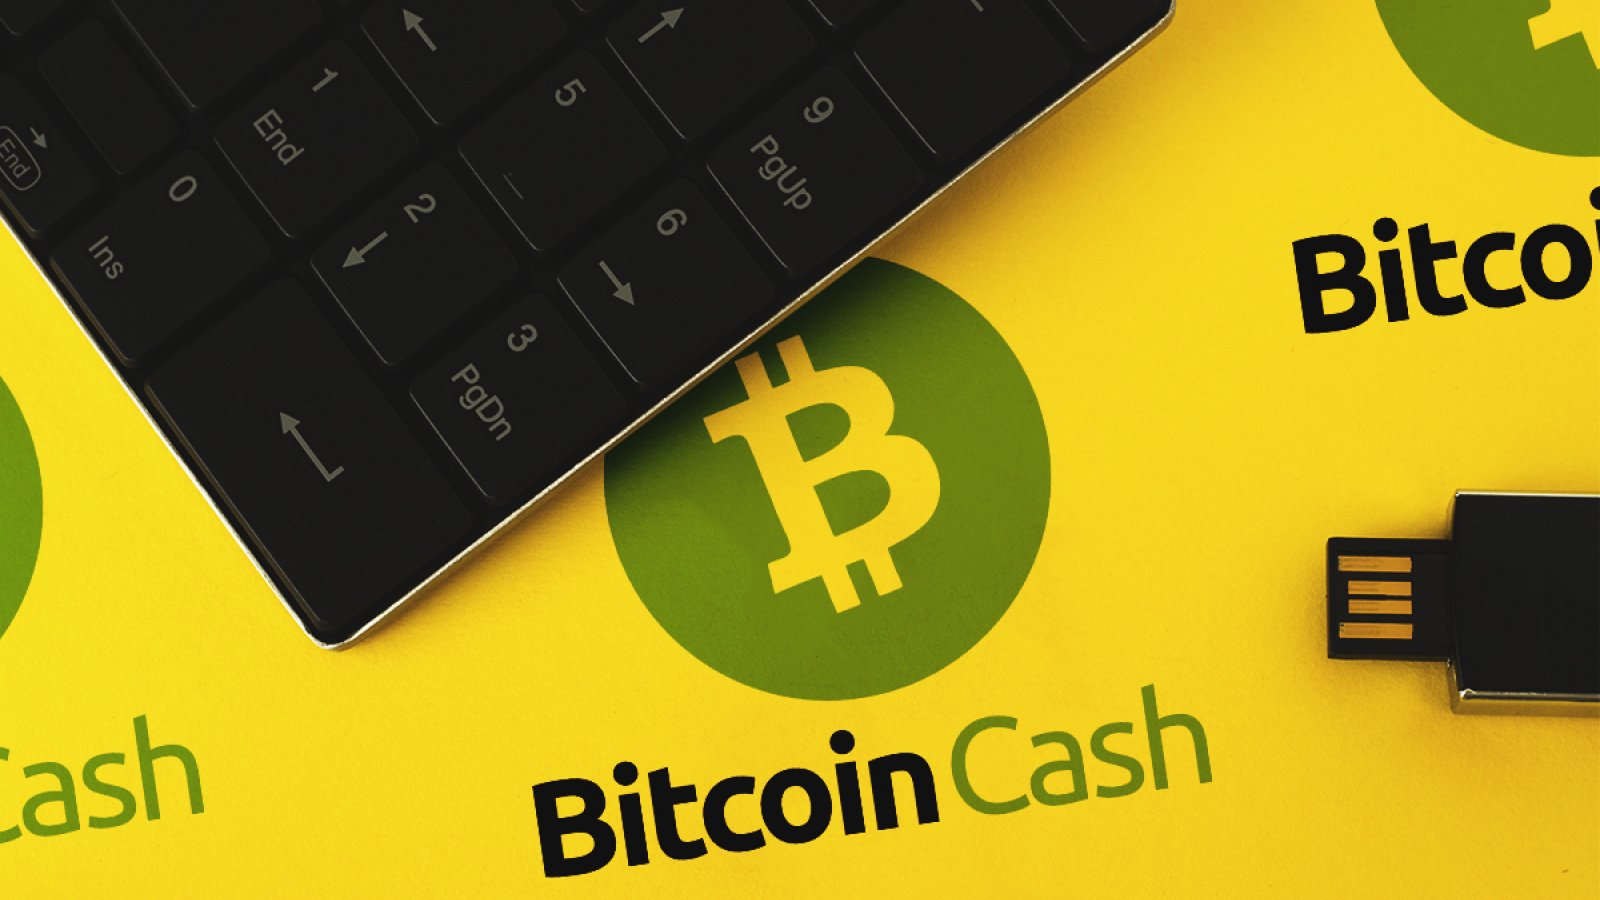 Bitcoin Cash Price Analysis 2019 20 25 How Much Might Bch Cost - 